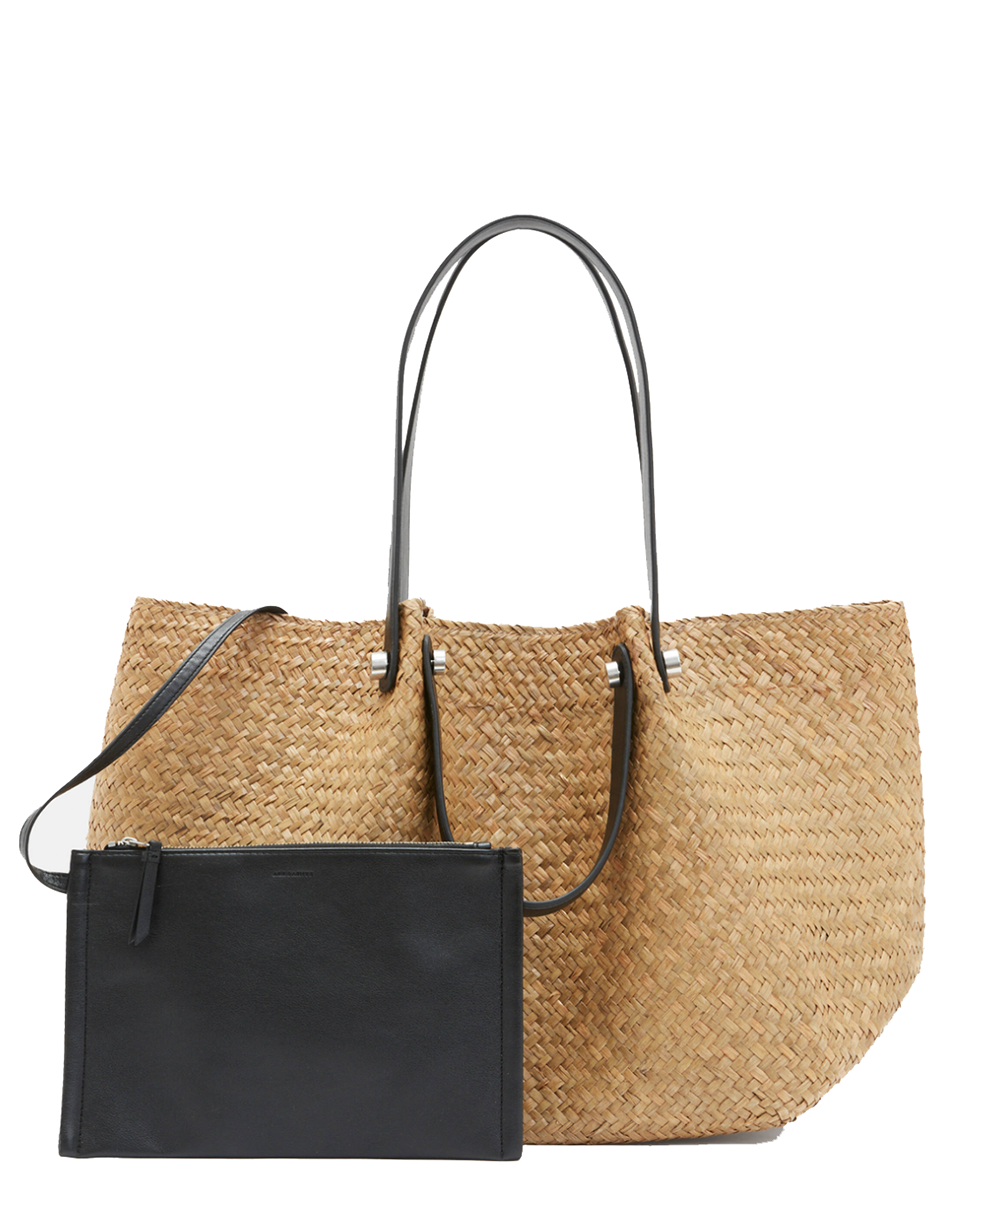 Best Summer 2023 Beach Bags I AllSaints Allington Straw Tote Bag #fashionstyle #ootdstyle #summeroutfit